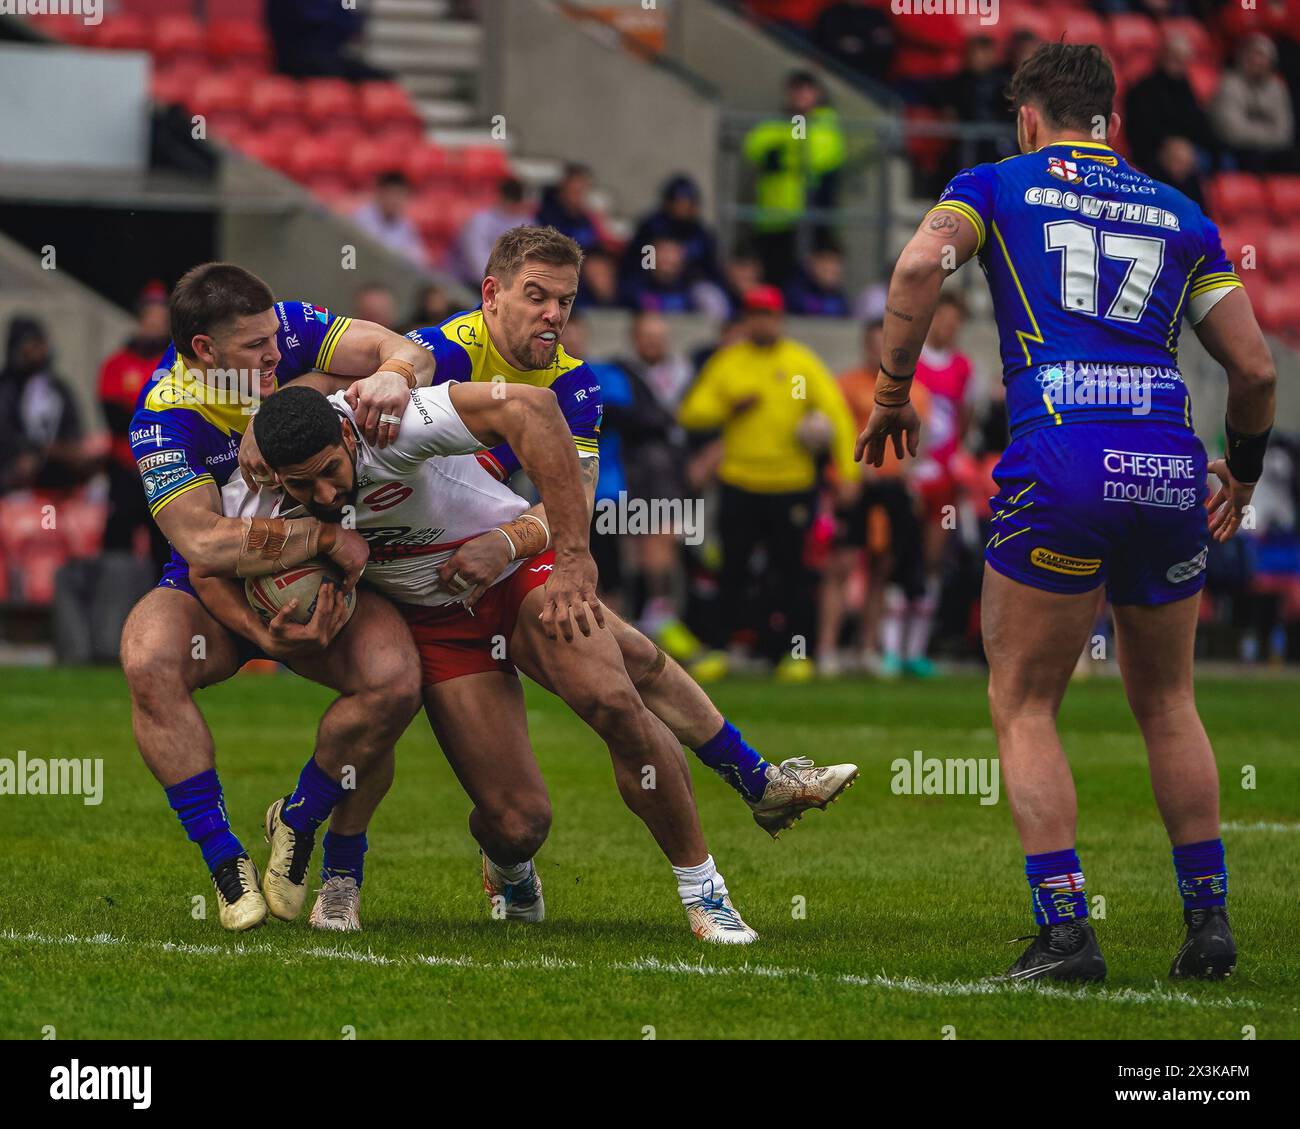 Salford, Manchester, UK. 27th April, 2024. Super League Rugby: Salford Red Devils Vs Warrington Wolves at Salford Community Stadium. NENE MACDONALD is tackled by MATT DUFTY AND DANNY WALKER. Credit James Giblin/Alamy Live News. Stock Photo